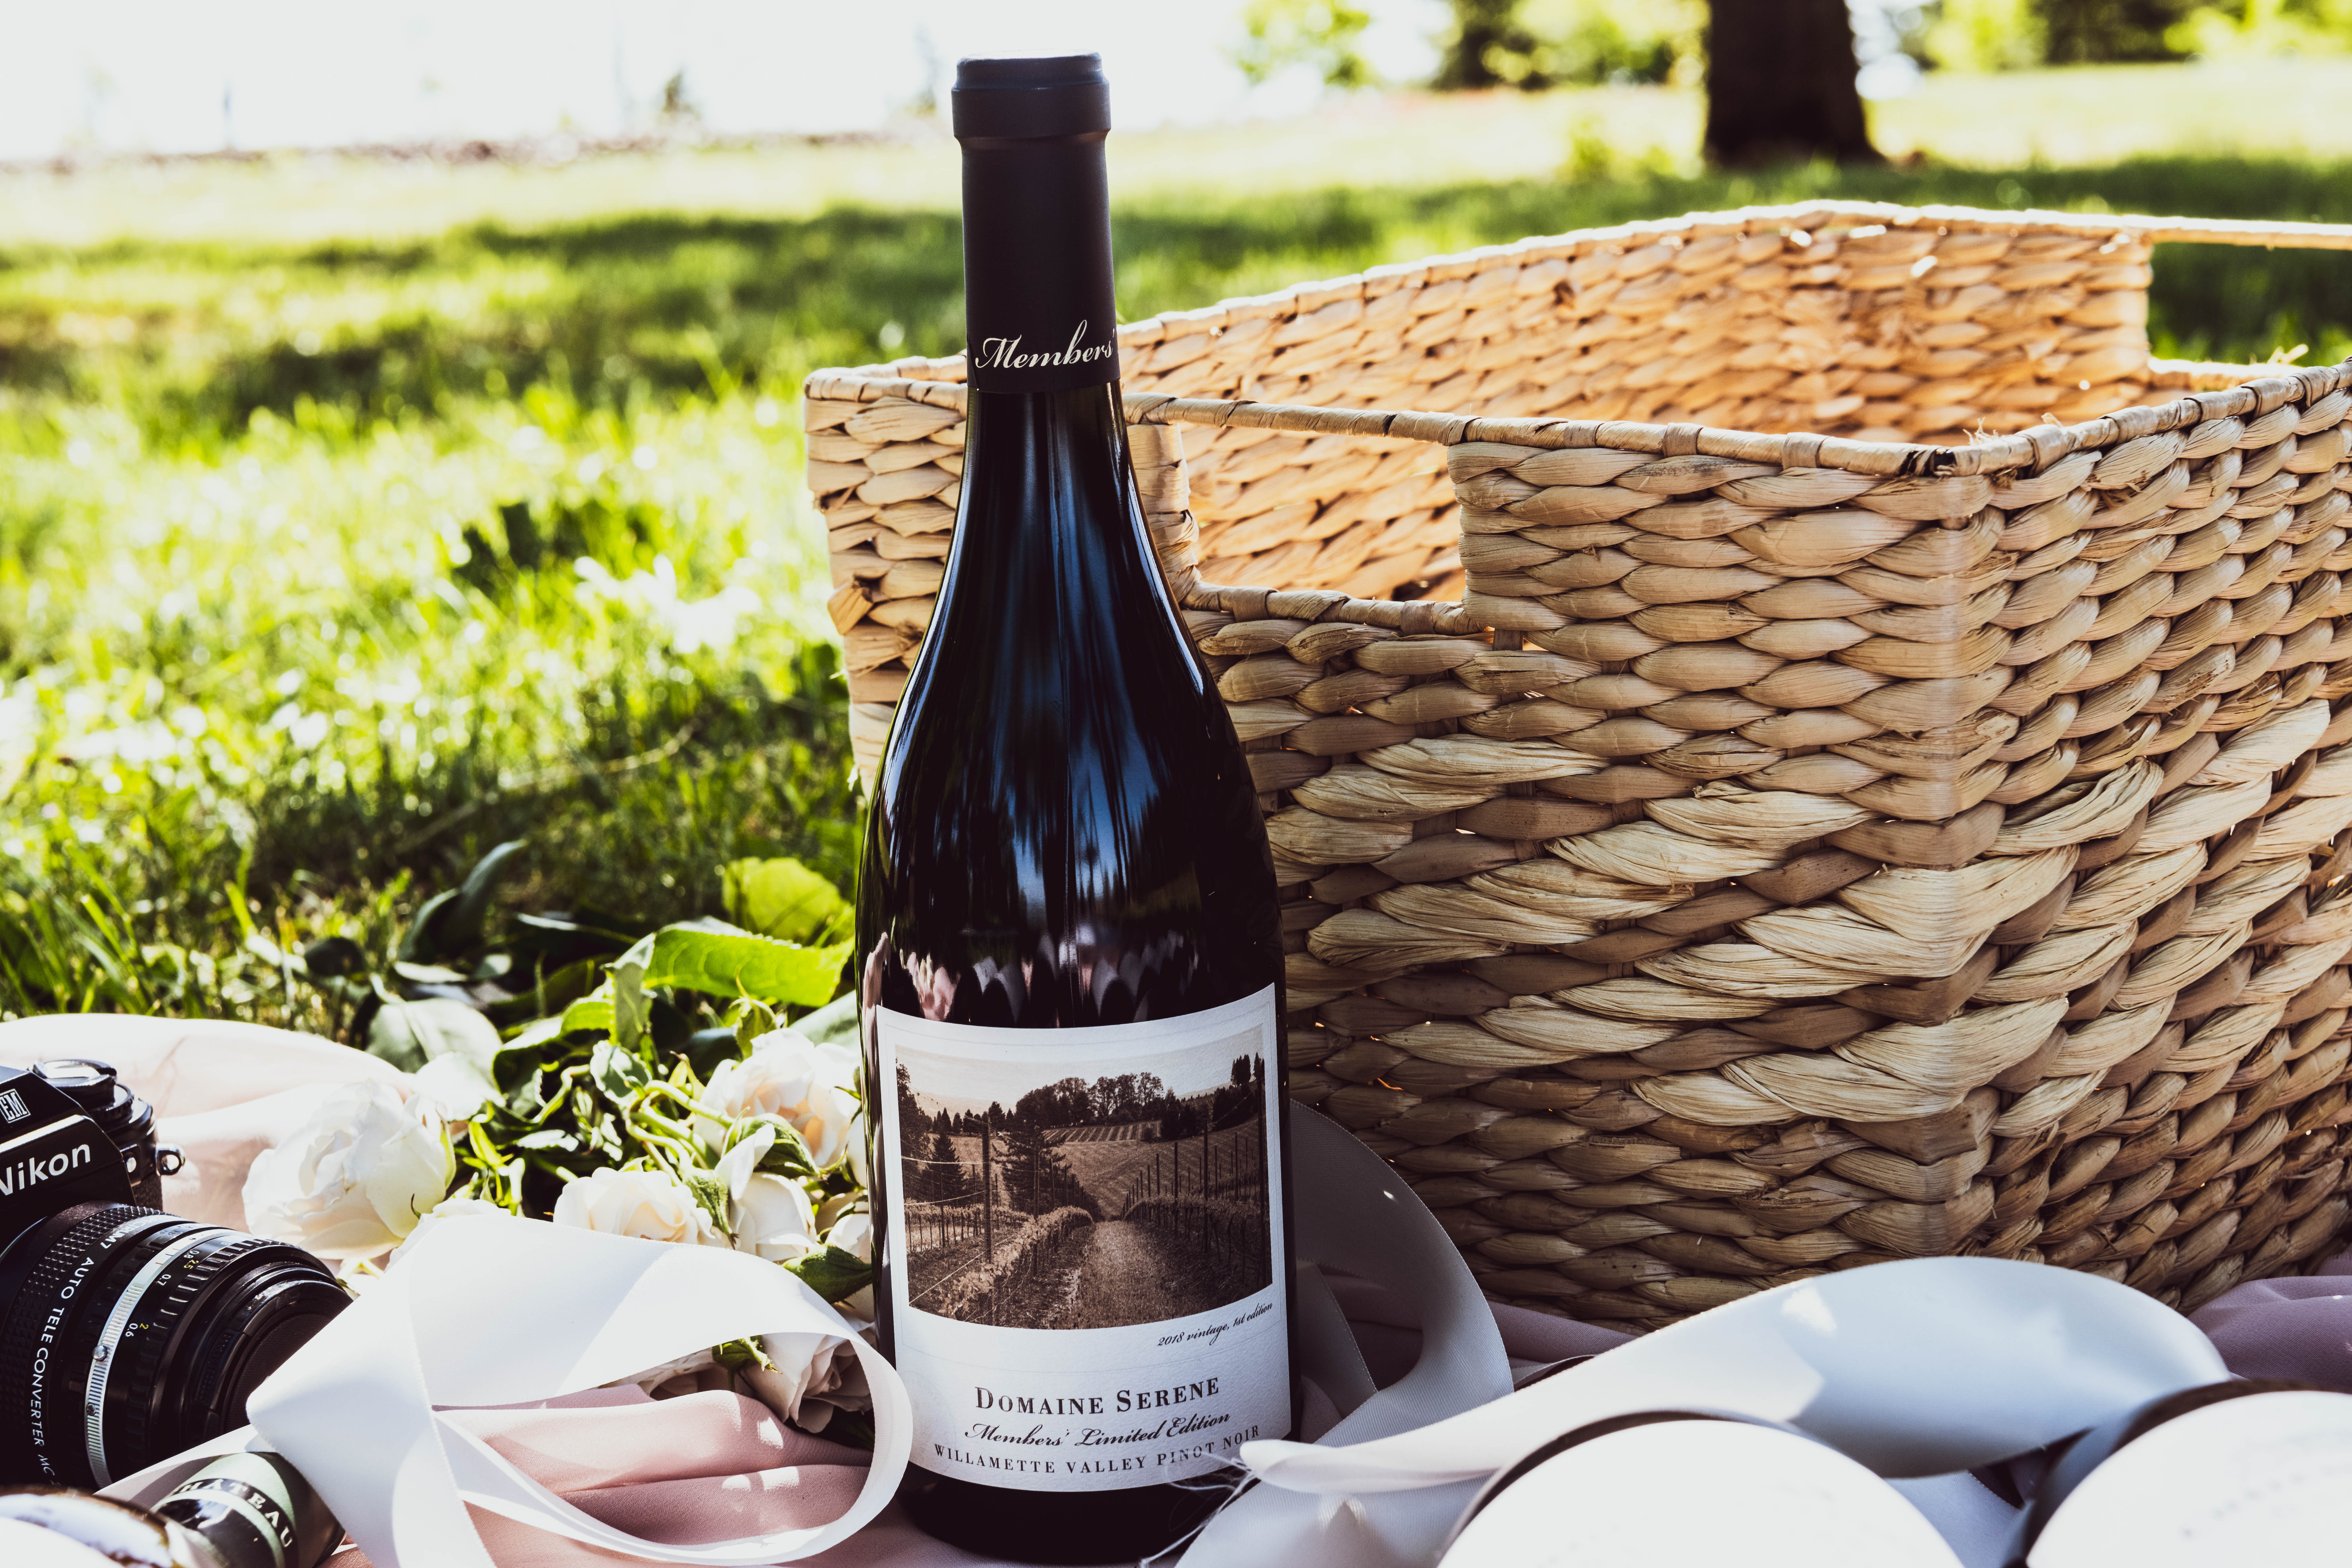 Pinot Noir Bottle with Picnic Basket